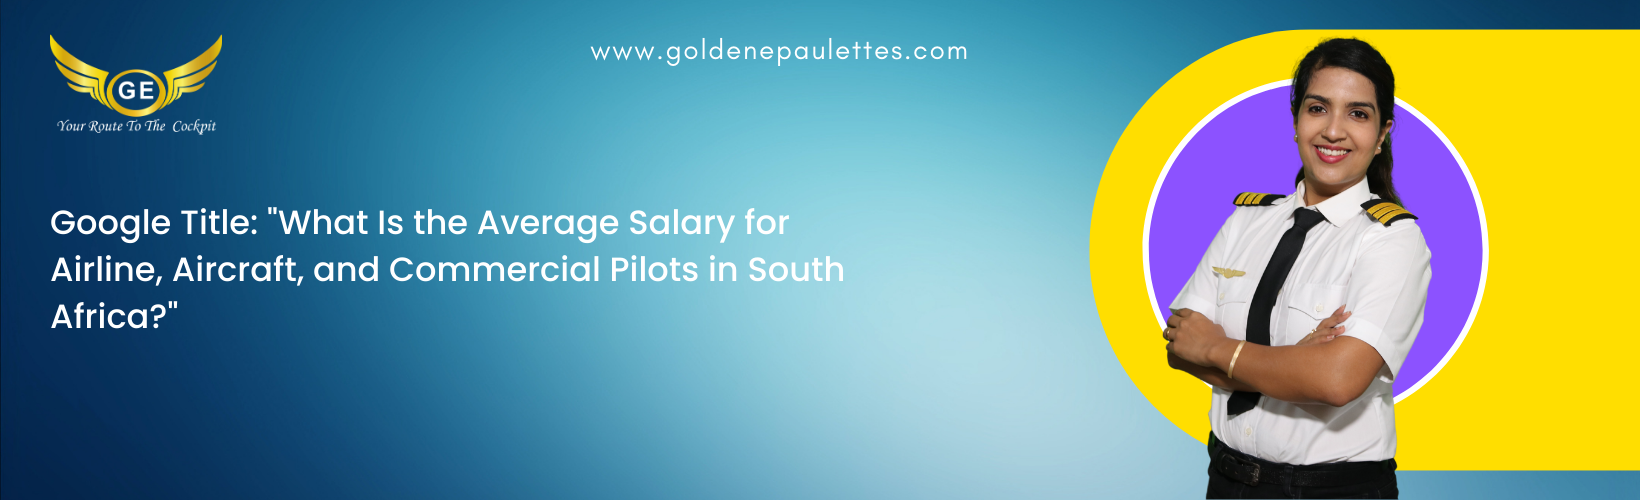 What Is the Average Salary for Pilots in South Africa